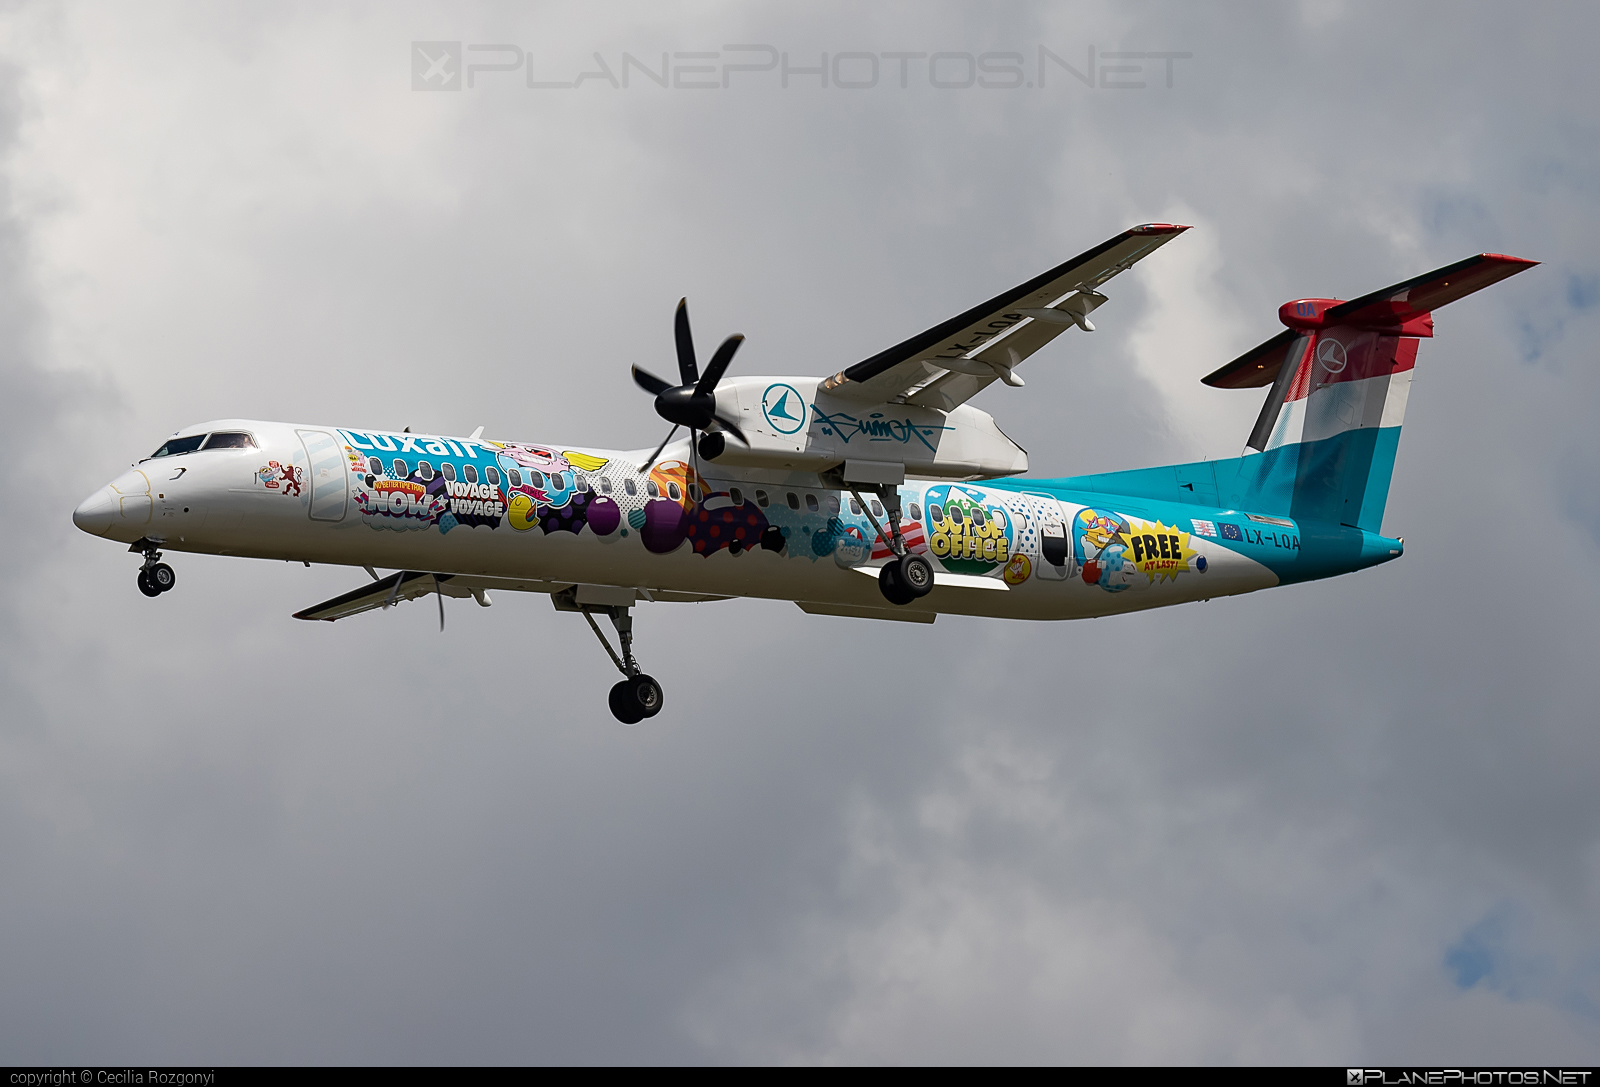 Bombardier DHC-8-Q402 Dash 8 - LX-LQA operated by Luxair #bombardier #dash8 #dhc8 #dhc8q402 #luxair